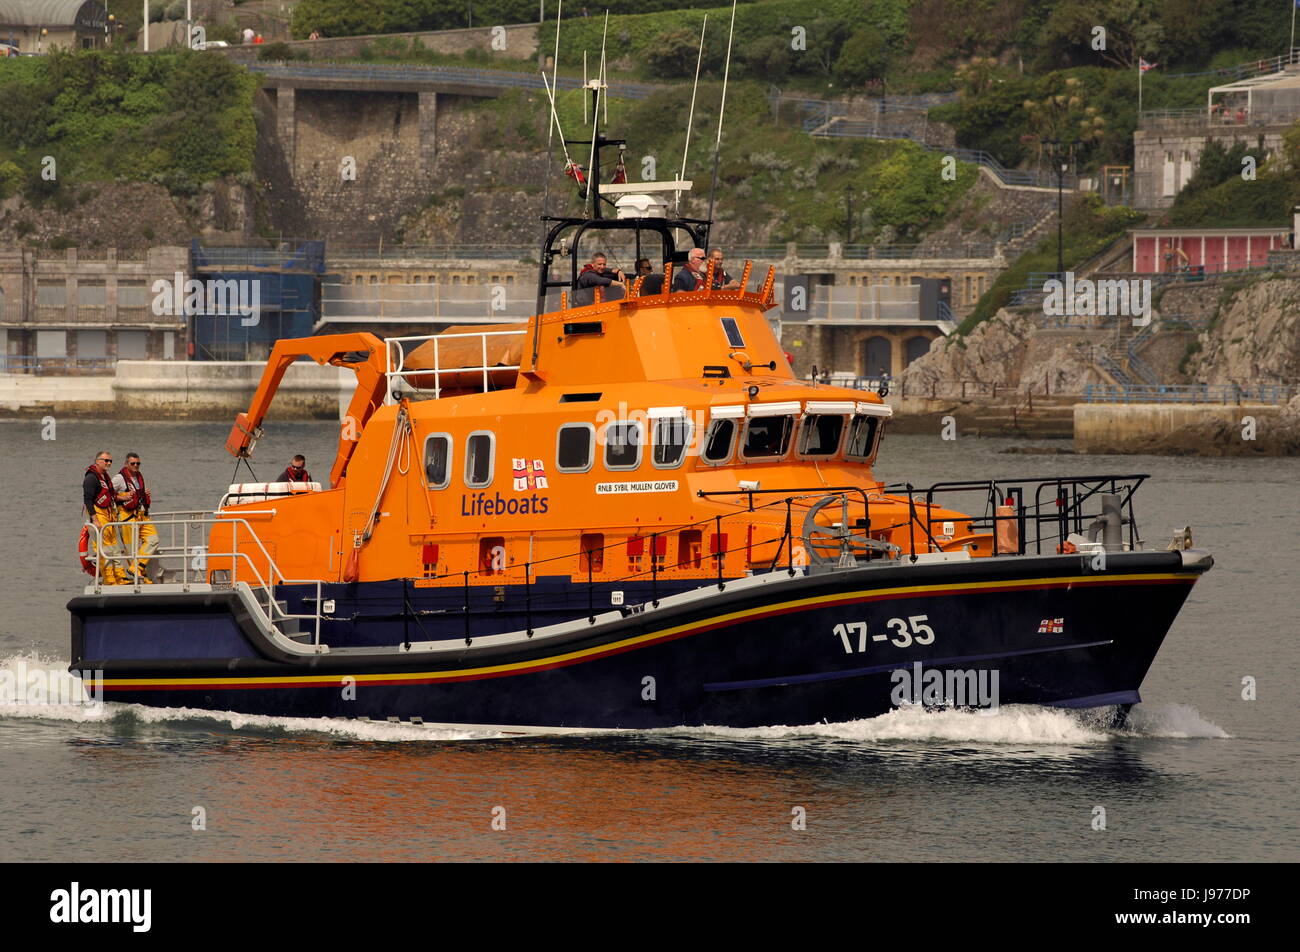 AJAXNETPHOTO. 29TH MAY, 2017. PLYMOUTH, ENGLAND. - LIFEBOAT - RNLB LIFEBOAT SYBIL MULLEN GLOVER HEADING FOR THE BARBICAN DOCK. PHOTO:JONATHAN EASTLAND/AJAX REF:D172905 6530 Stock Photo